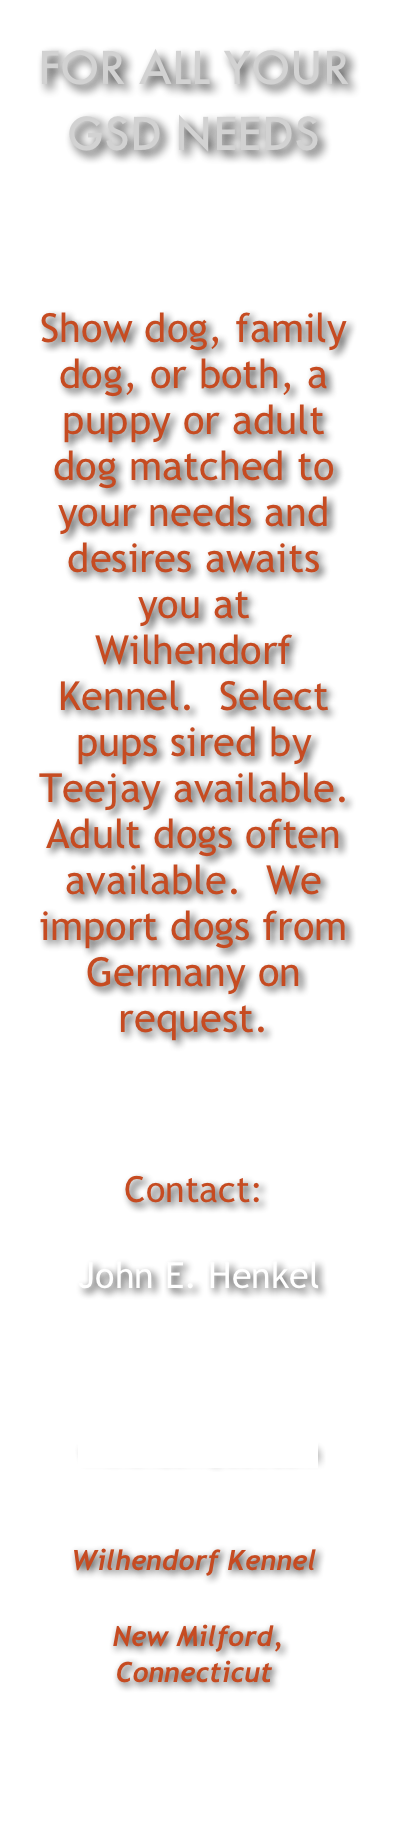 For all Your GSD Needs



Show dog, family dog, or both, a puppy or adult dog matched to your needs and desires awaits you at Wilhendorf Kennel.  Select pups sired by Teejay available.  Adult dogs often available.  We import dogs from Germany on request.

Contact:
 John E. Henkel
Cellular: 203-947-0264


 wilhendorf@aol.com 
 
Wilhendorf Kennel 
 New Milford, Connecticut
